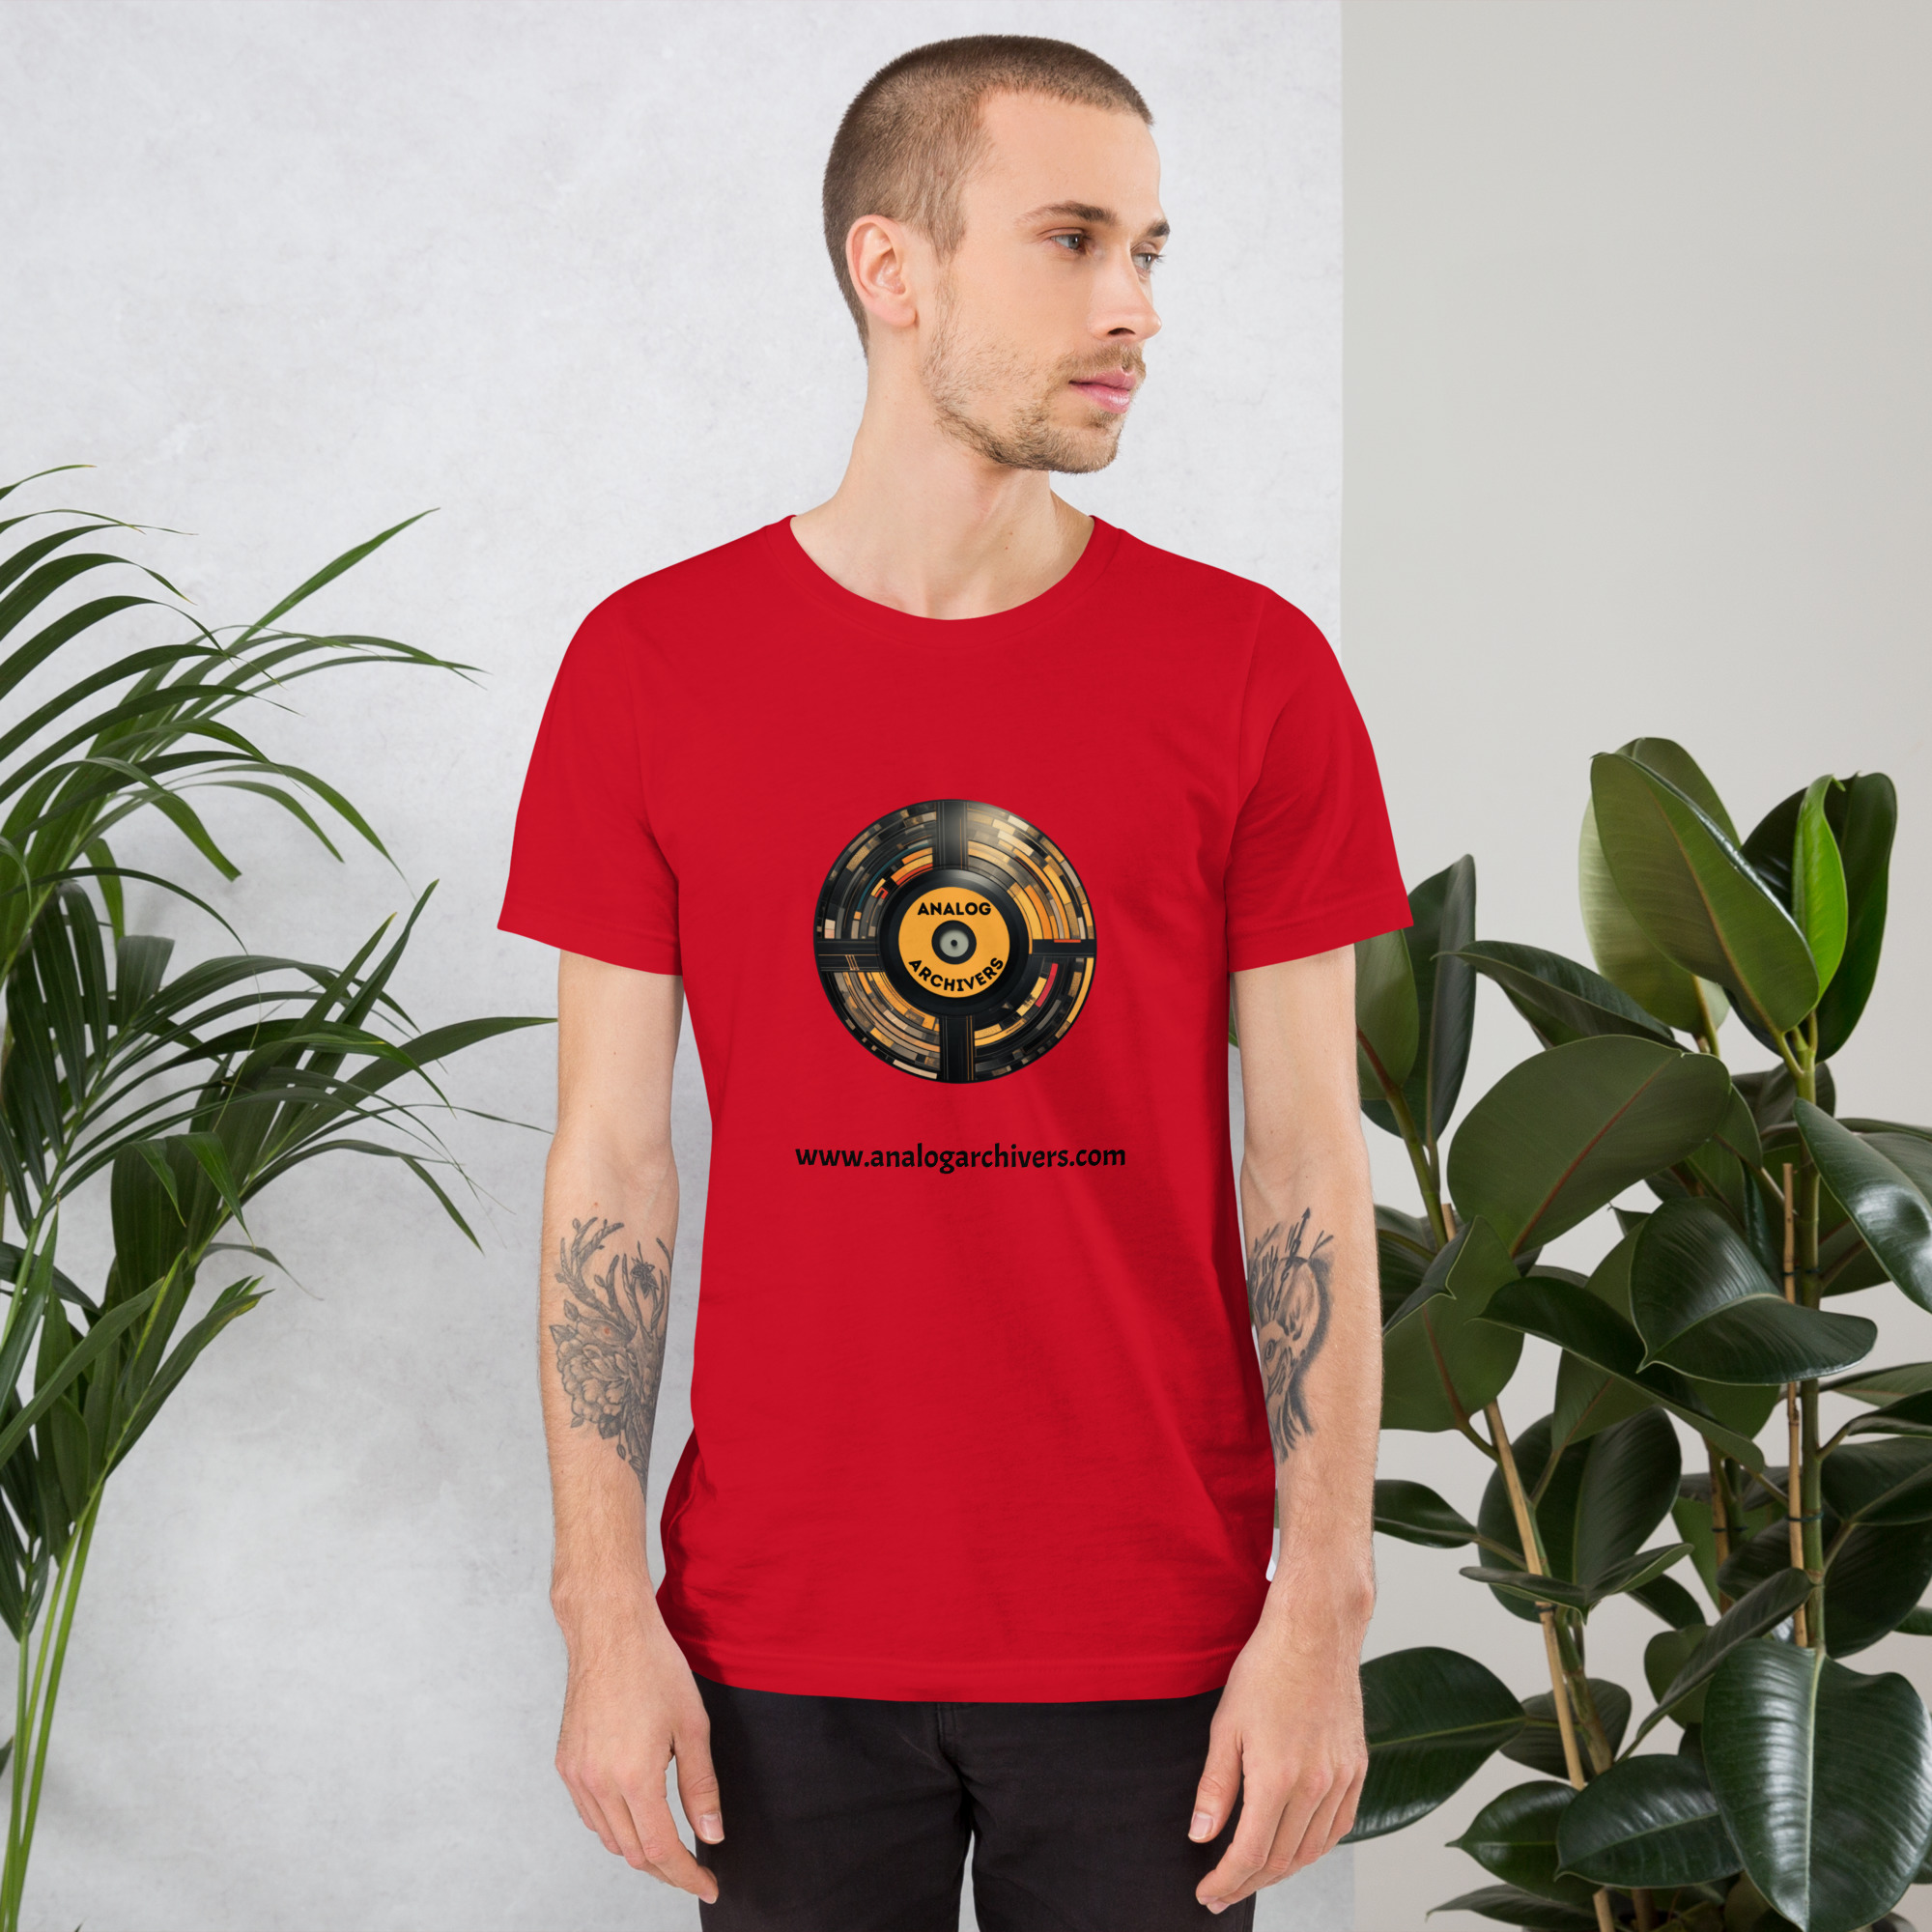 Analog Archivers t-shirt